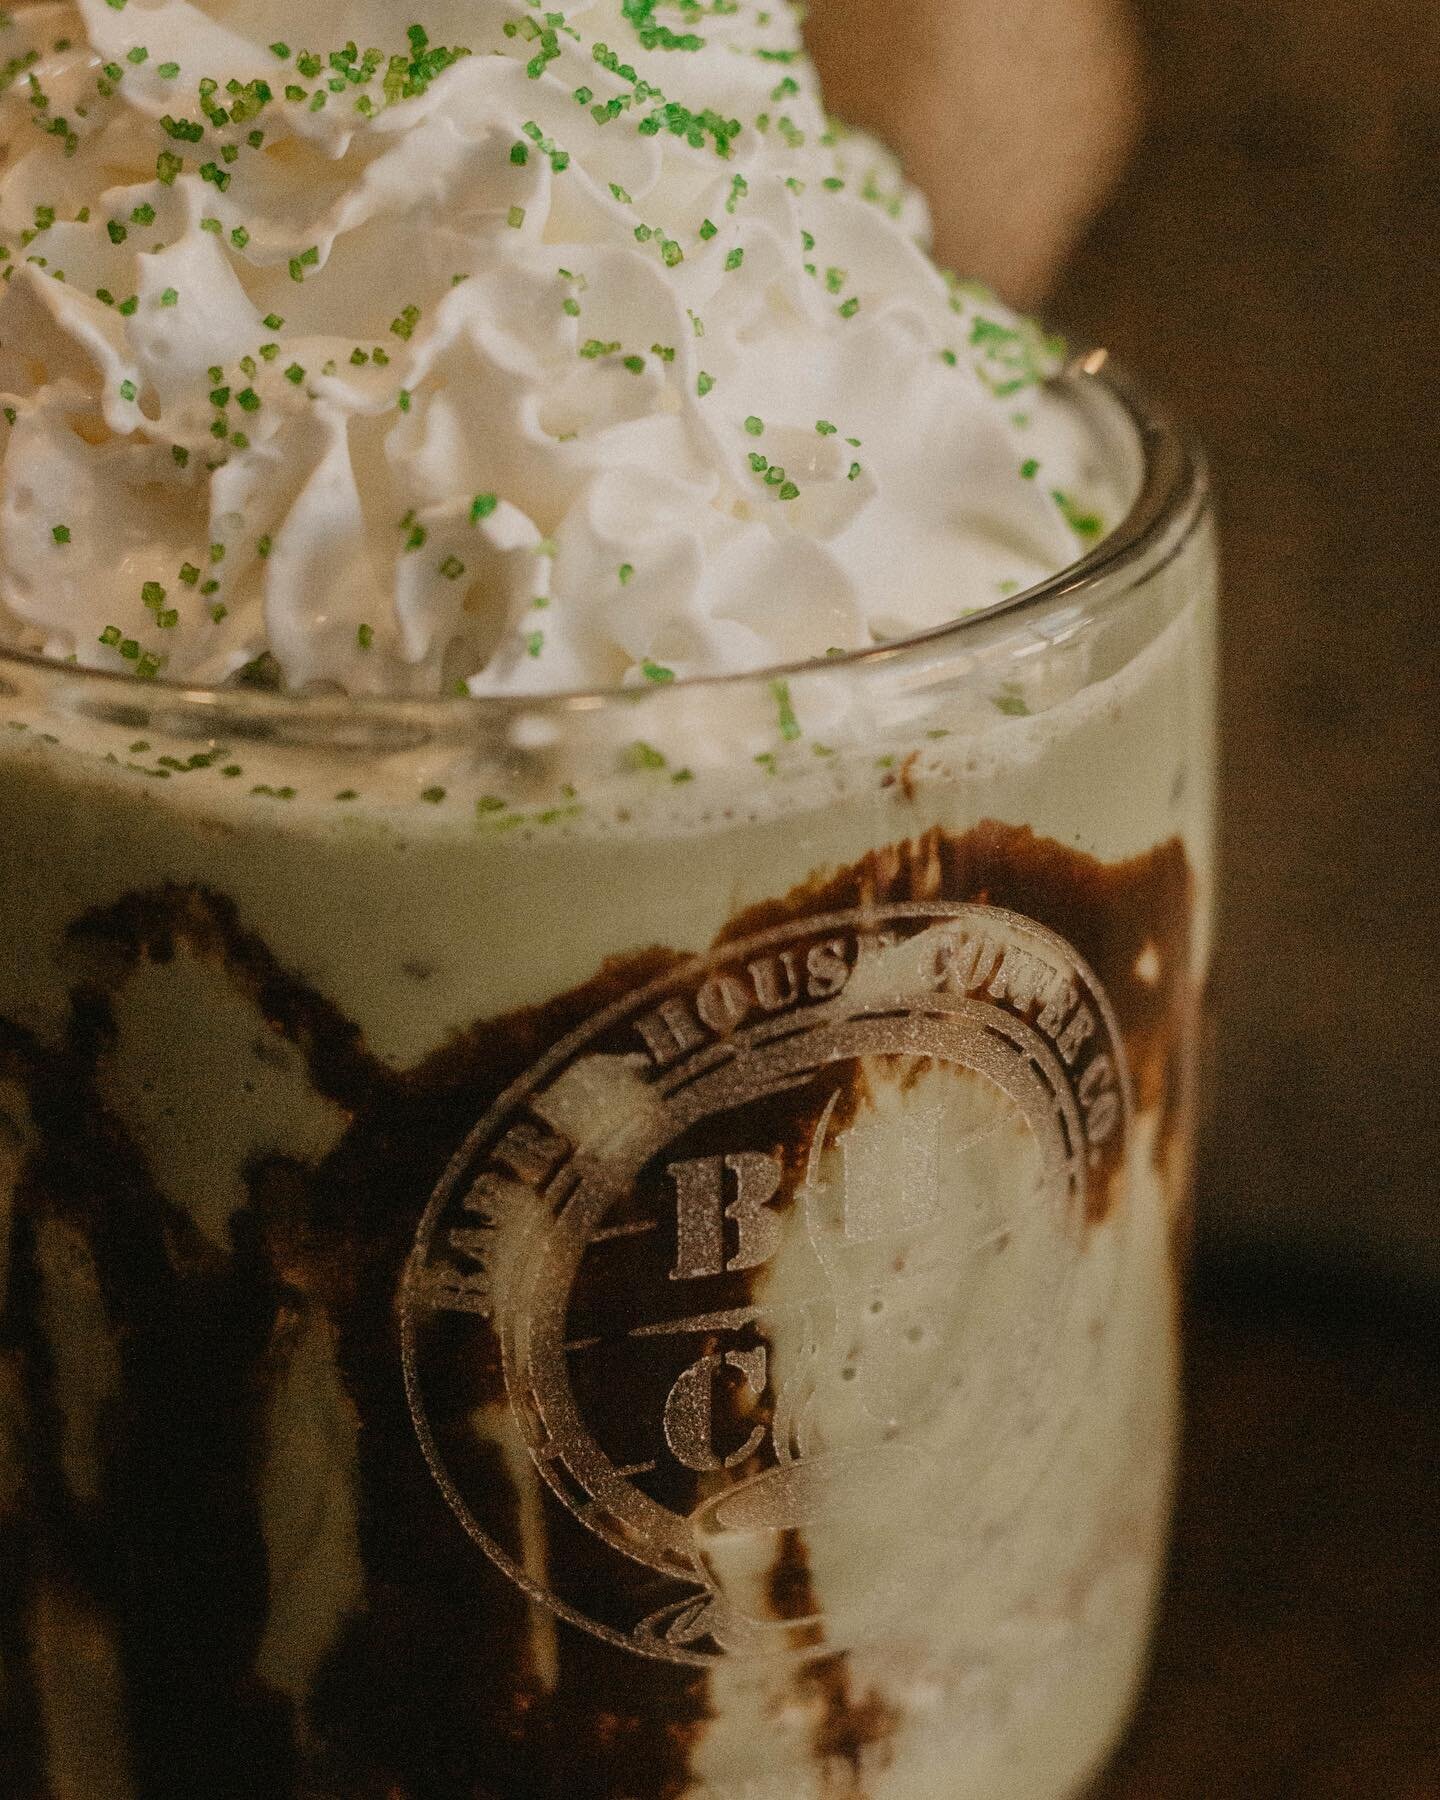 We have the perfect drink for this warmer weather... our limited-edition Celtic Frost, only available frozen! This frozen matcha latte with chocolate chips and chocolate syrup is the perfect refreshing treat for such a beautiful day. ☀️ 

#barrelhous